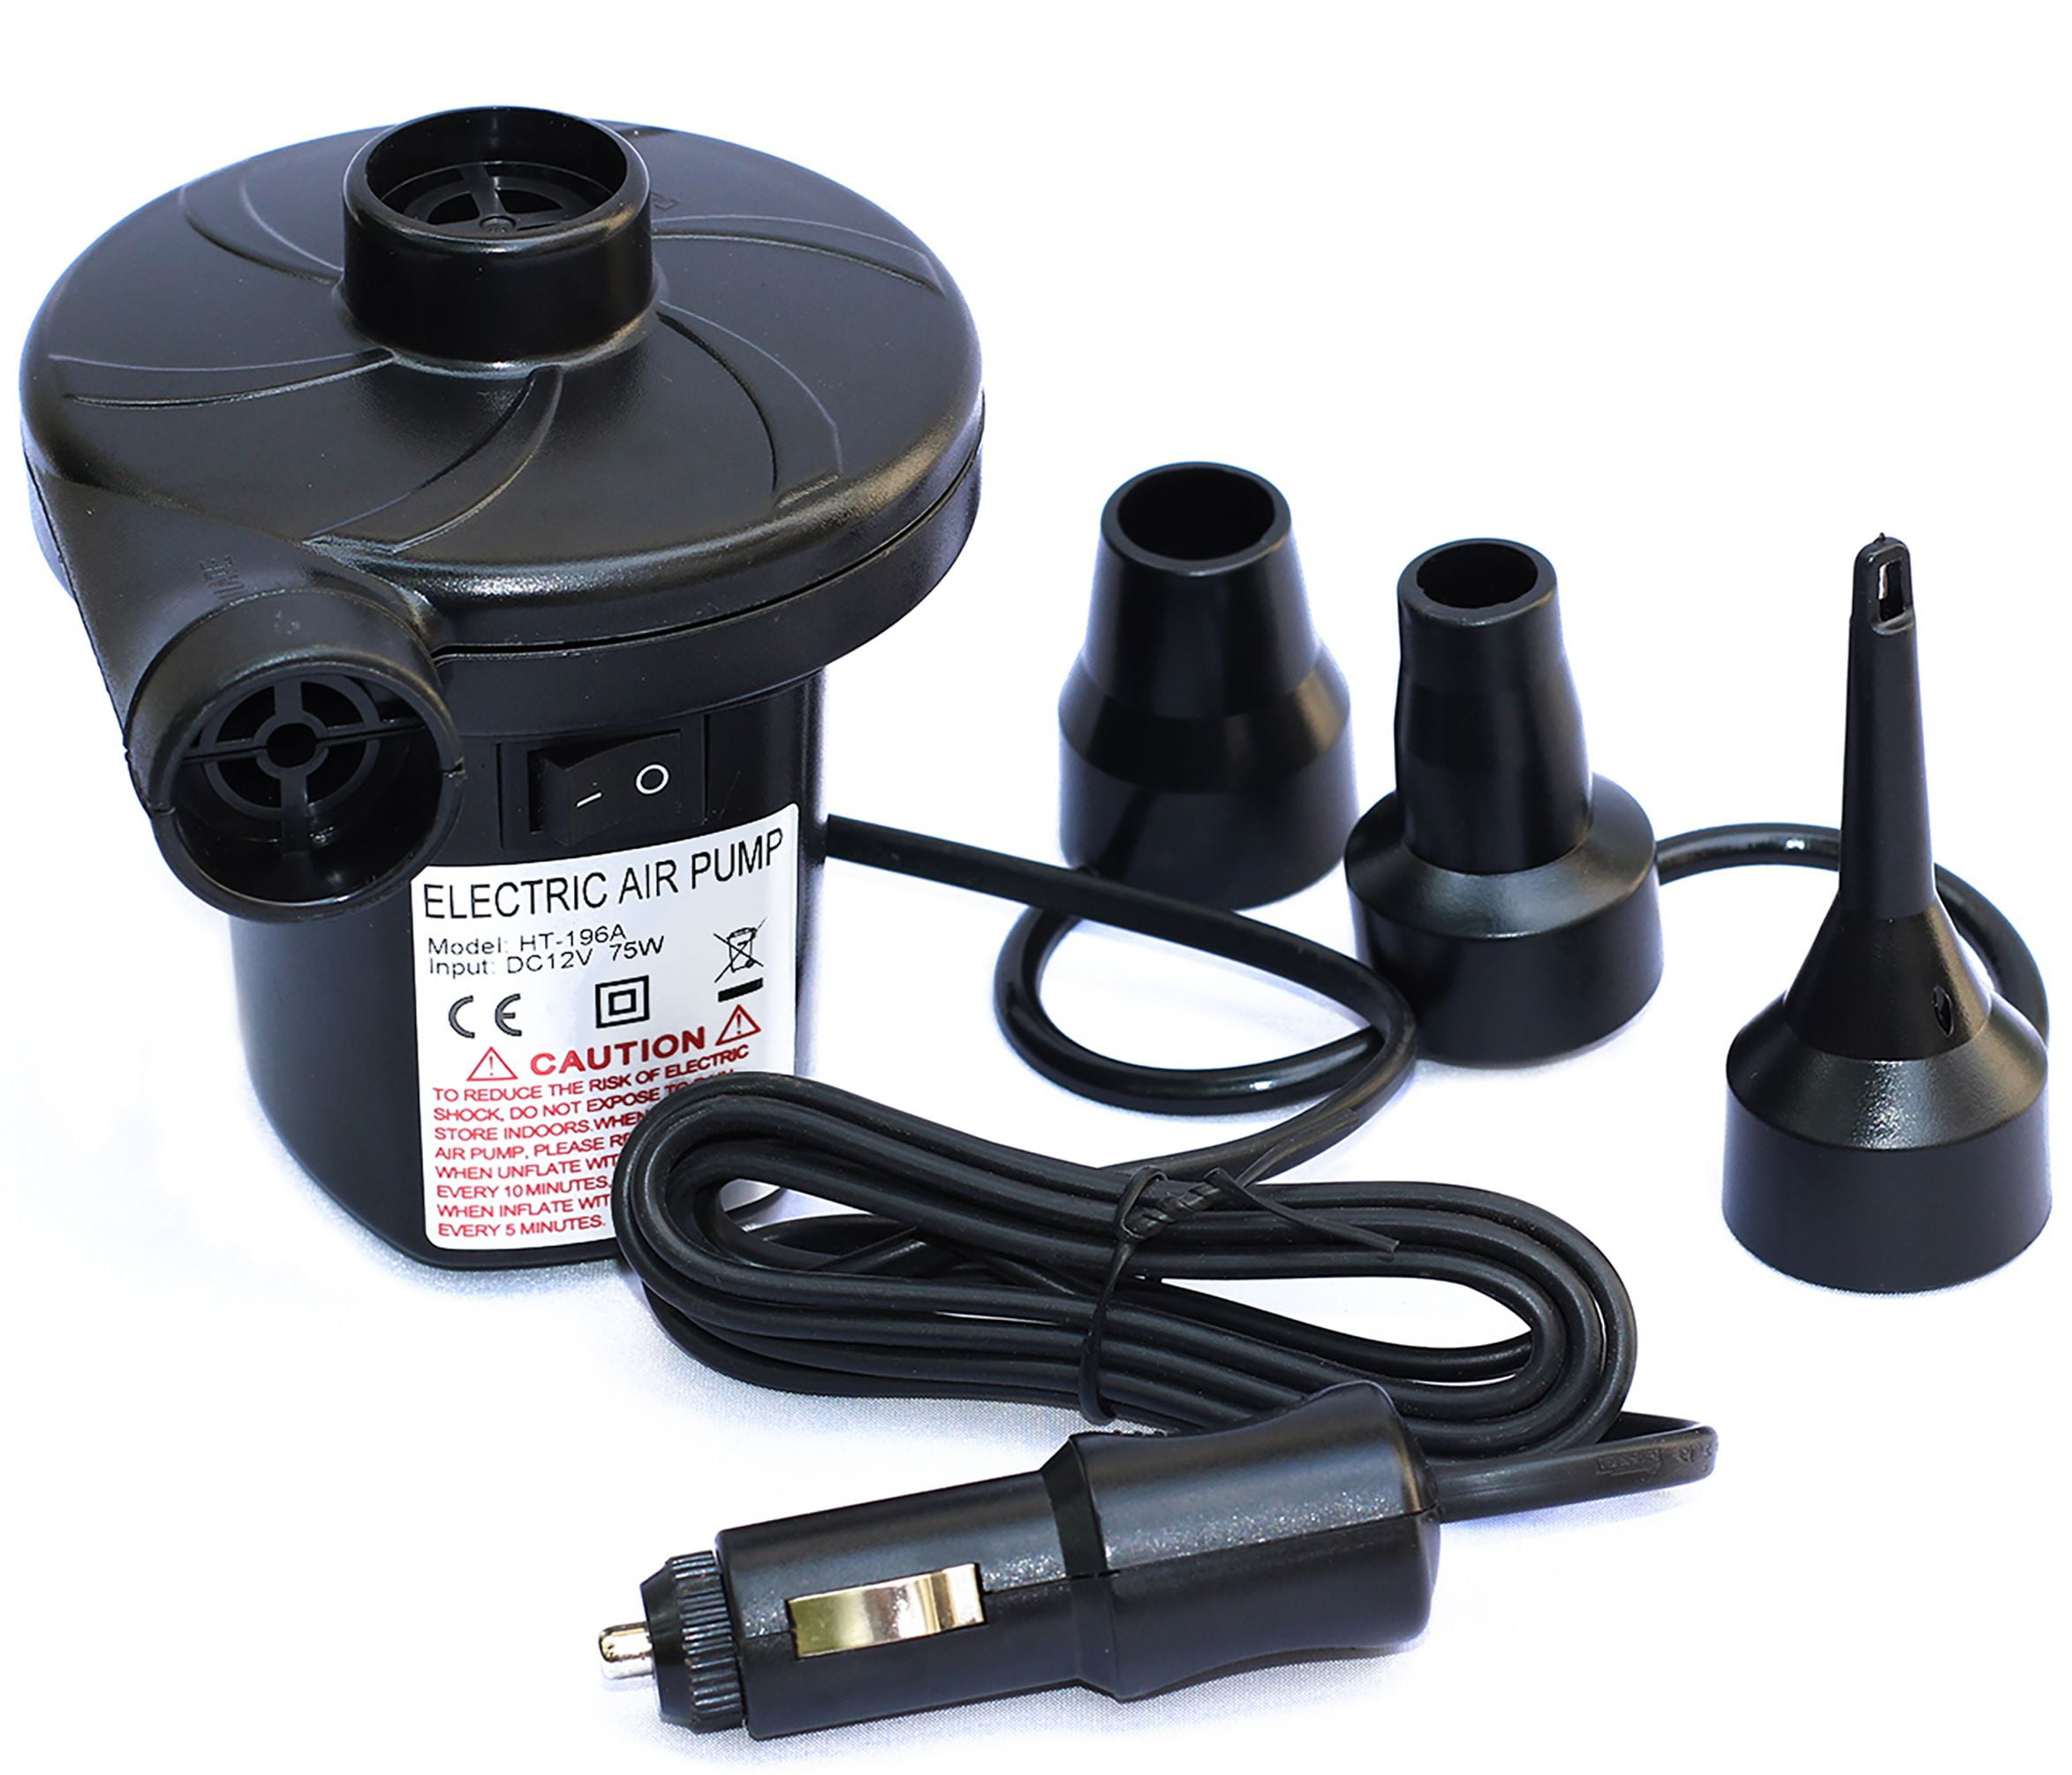 Electric Air Pump for Inflatables Portable Quick Air Pump with 3 Nozzles Pool 